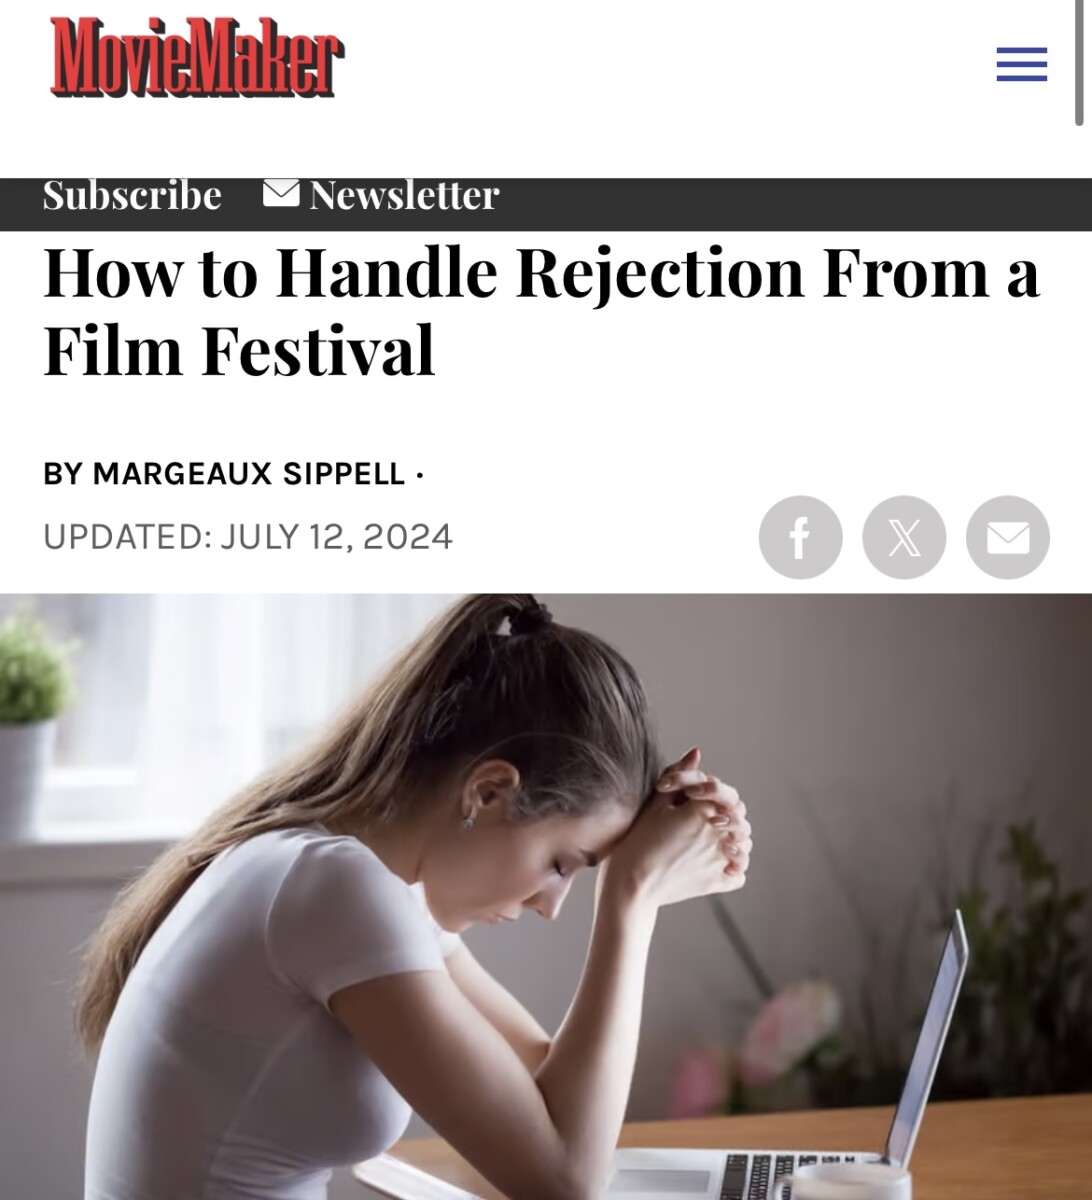 How to Handle Rejection From a Film Festival